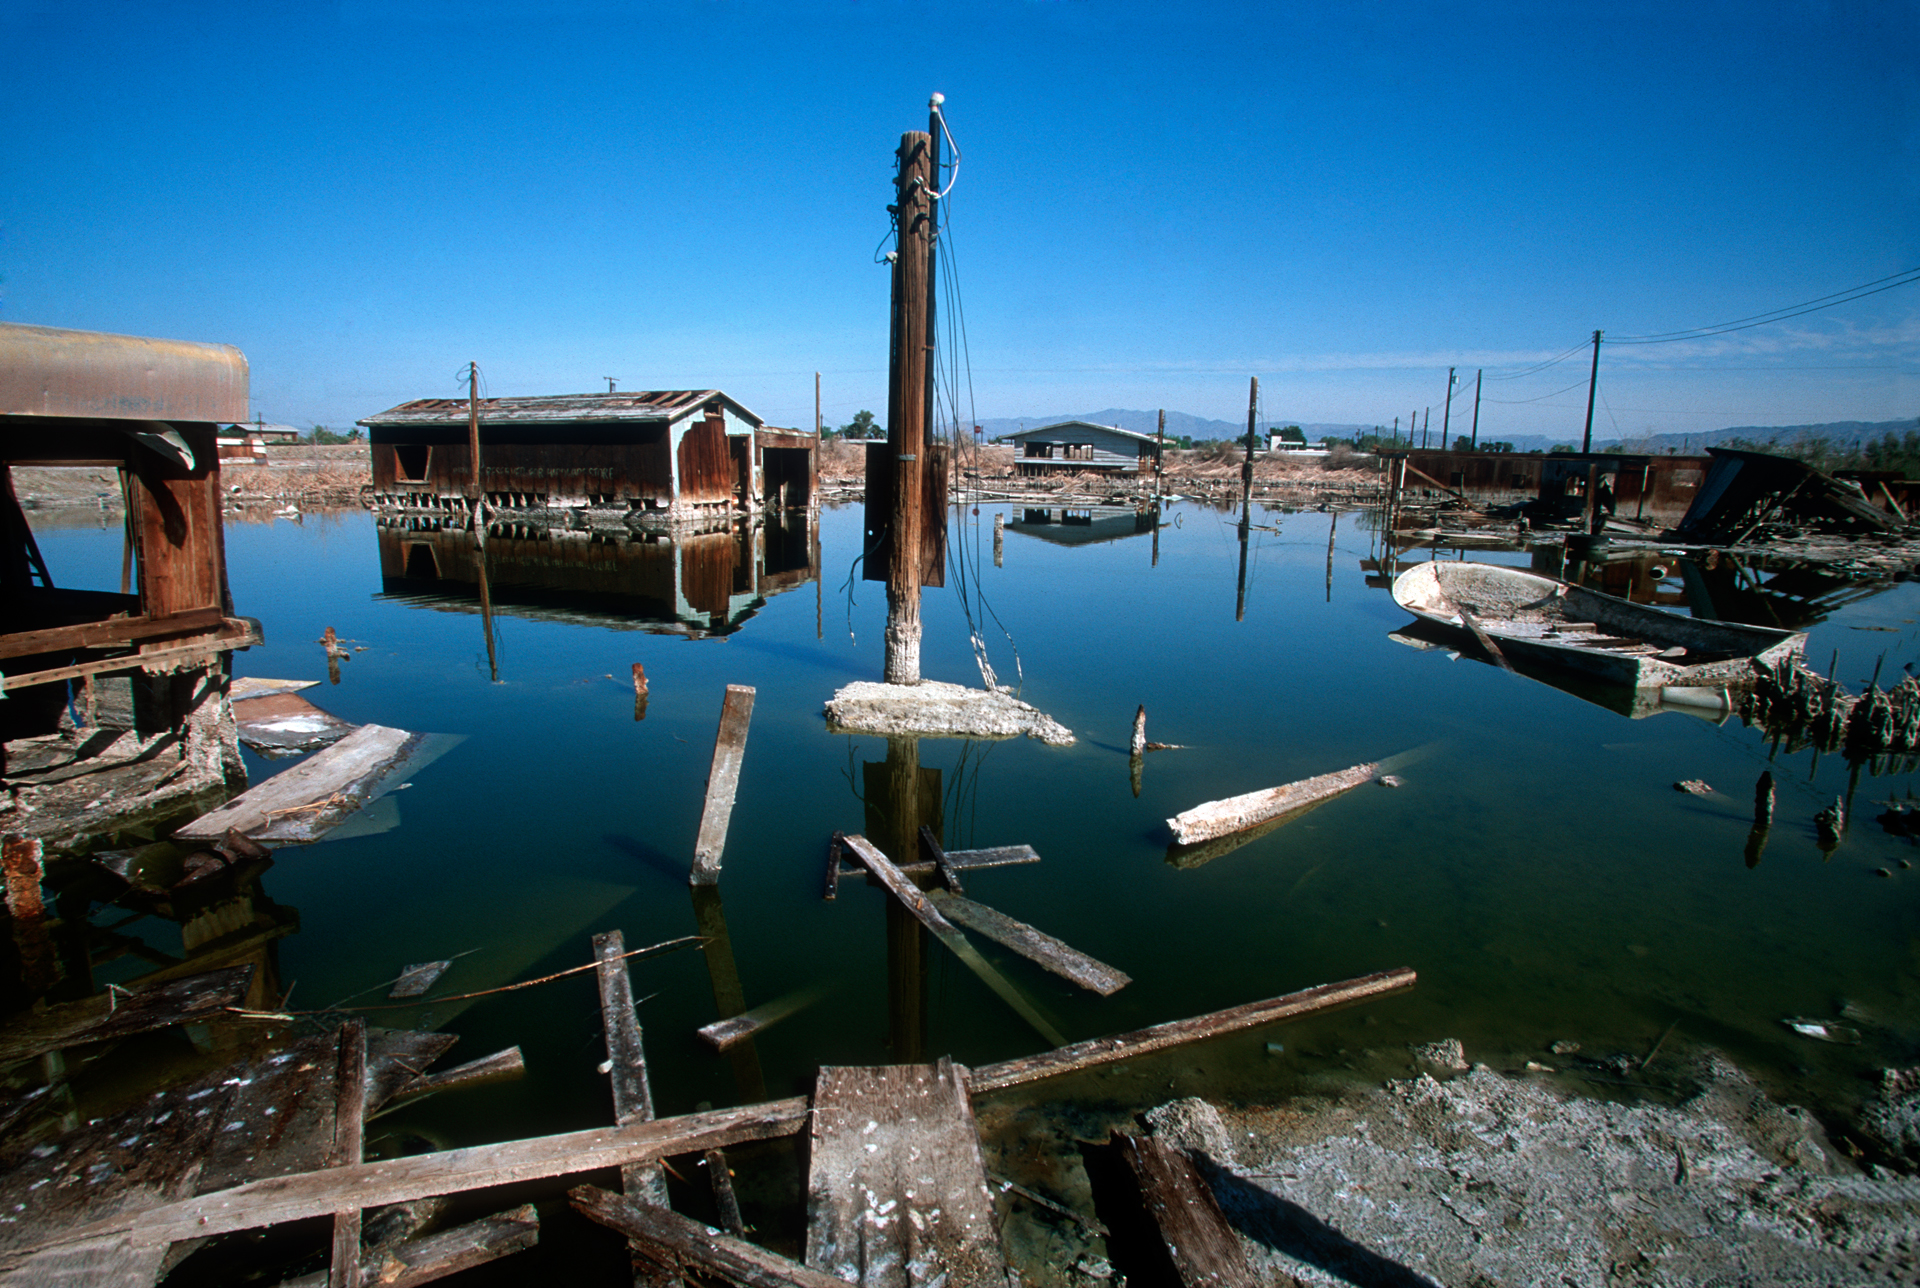  The fluctuation in sea level has flooded abandoned homes, leaving them to rot in the salt encrusted water.  Bombay Beach 